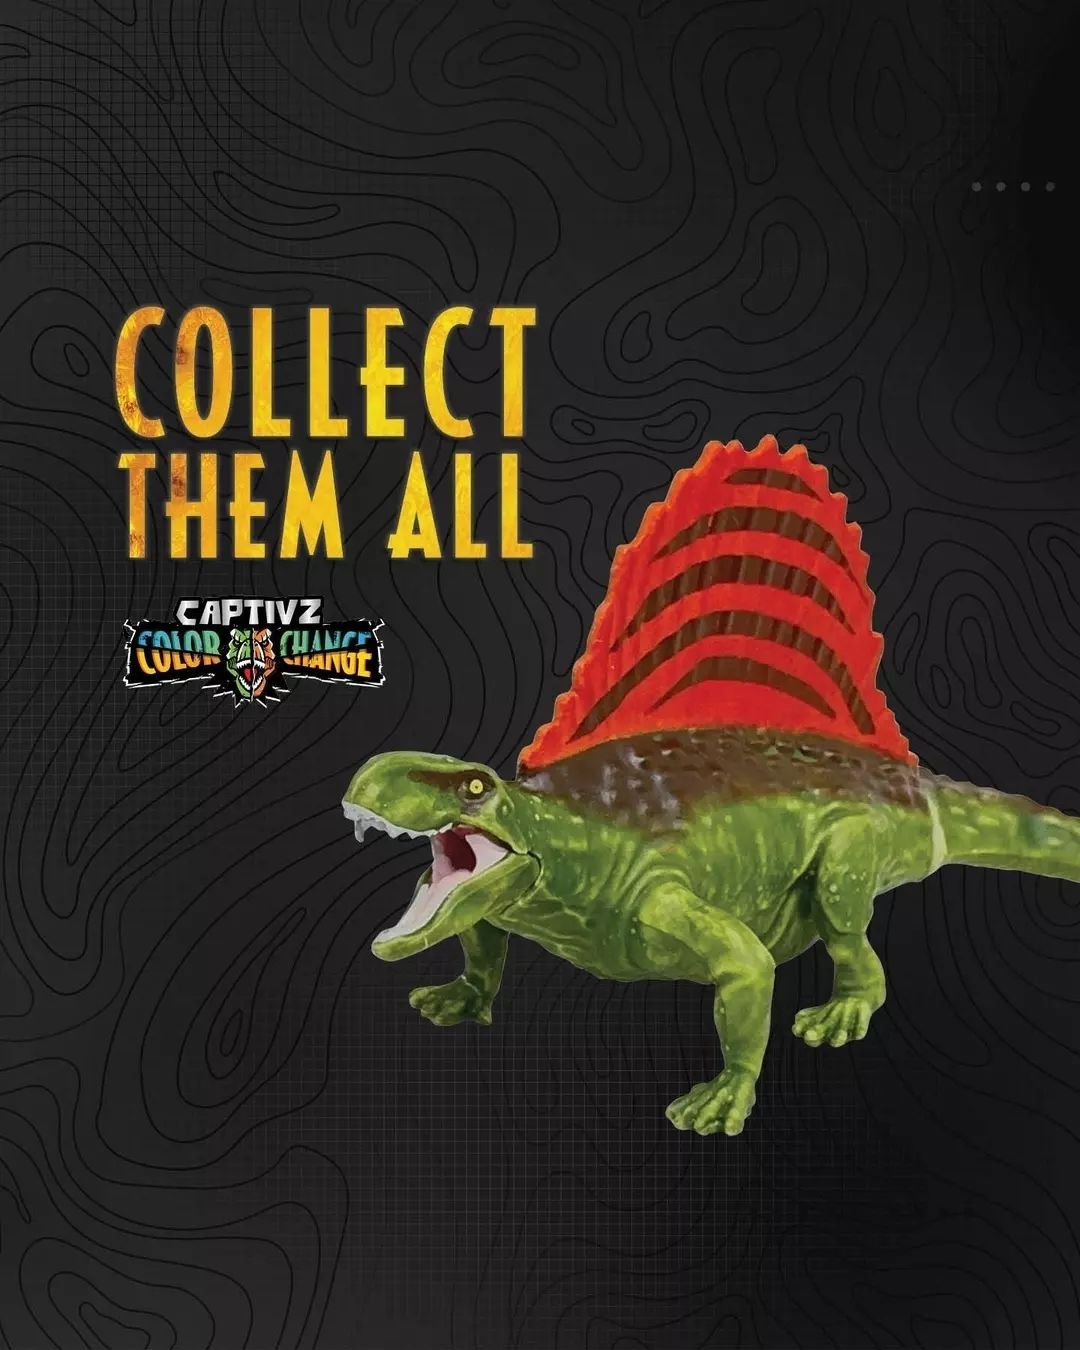 HAVE YOU SPOTTED THESE NEW DINOS?

A new member has been added to the Color-Change Captiz - have you found it yet?&nbsp;
.
.
.
.
.
#ToysUS #Lava #Jurrasic #ClashWinner #Surprise #JurrasicPark #BattleWinner #ToyMonsterInternational #CrackTheEgg #Capti